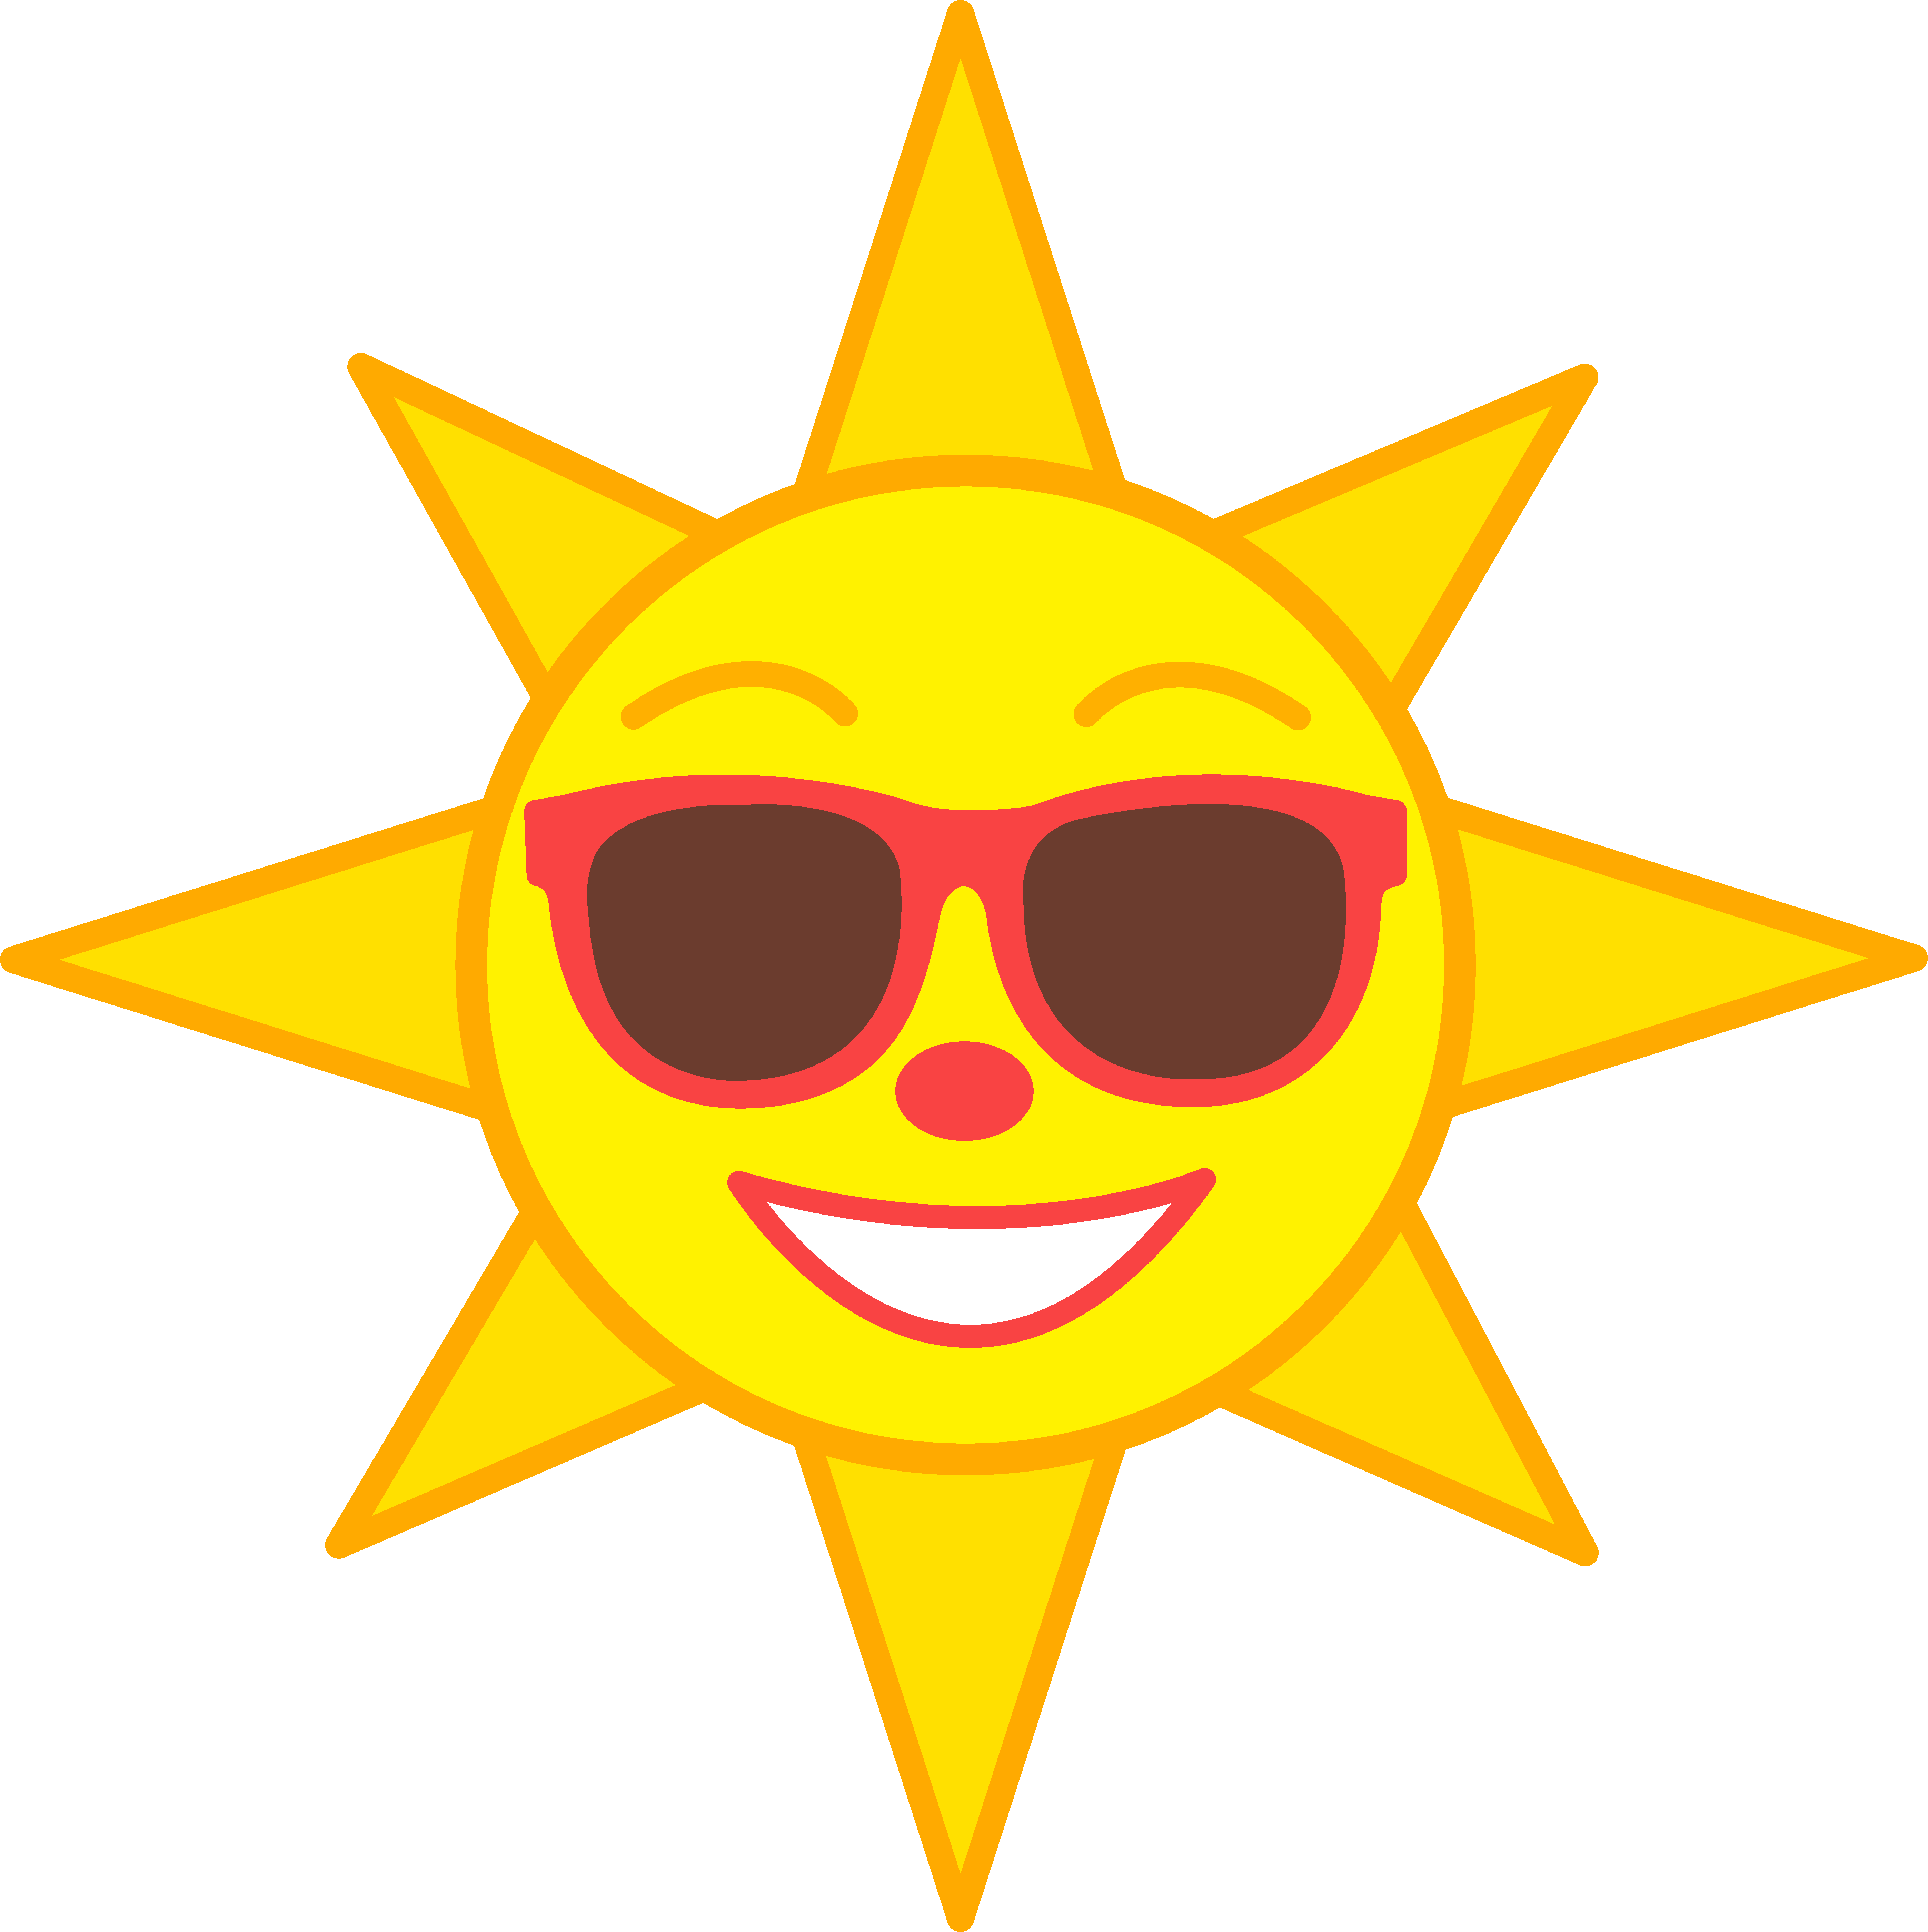 Bright Sun Background PNG Image